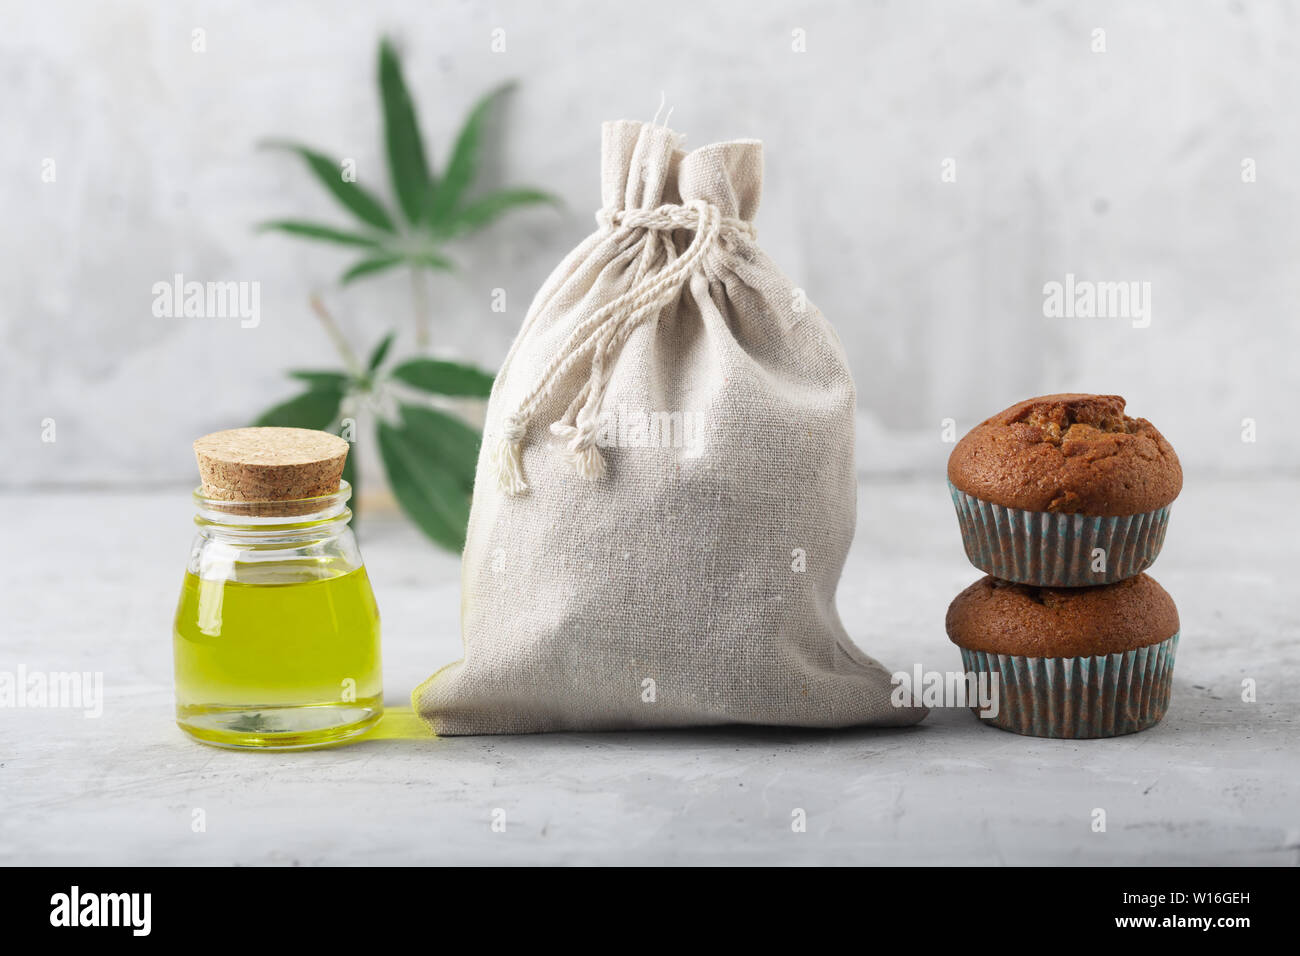 Cannabis oil extract, muffins and fabric bag produced using this plant. Gray background Stock Photo